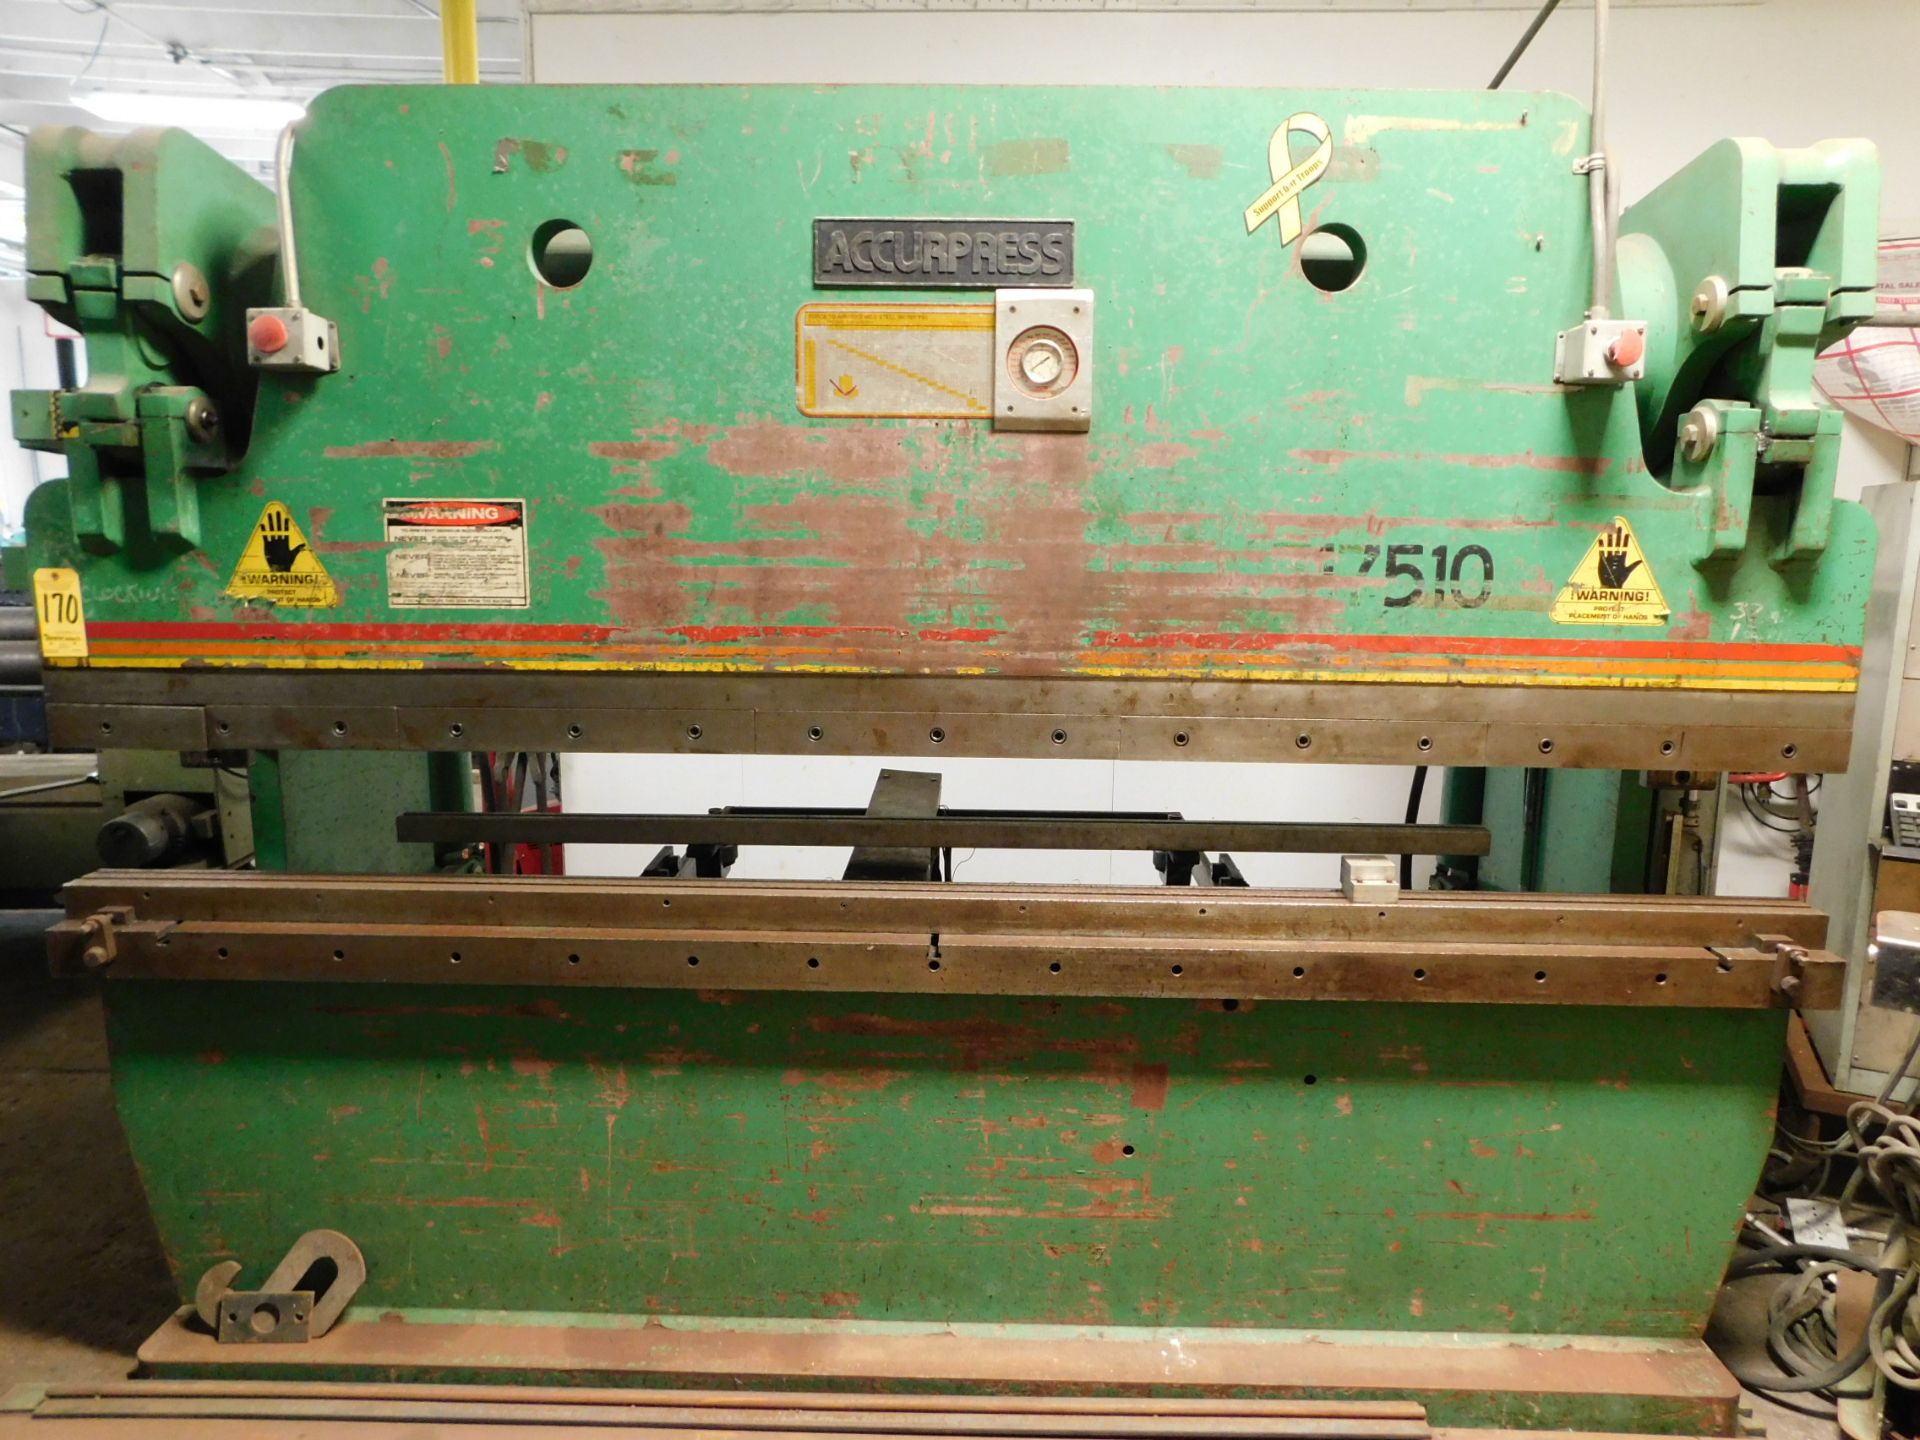 Accurpress Model 717510 Hydraulic Press Brake, s/n 1510, New 1990, 175 Ton, 10' Overall, 102" - Image 2 of 14